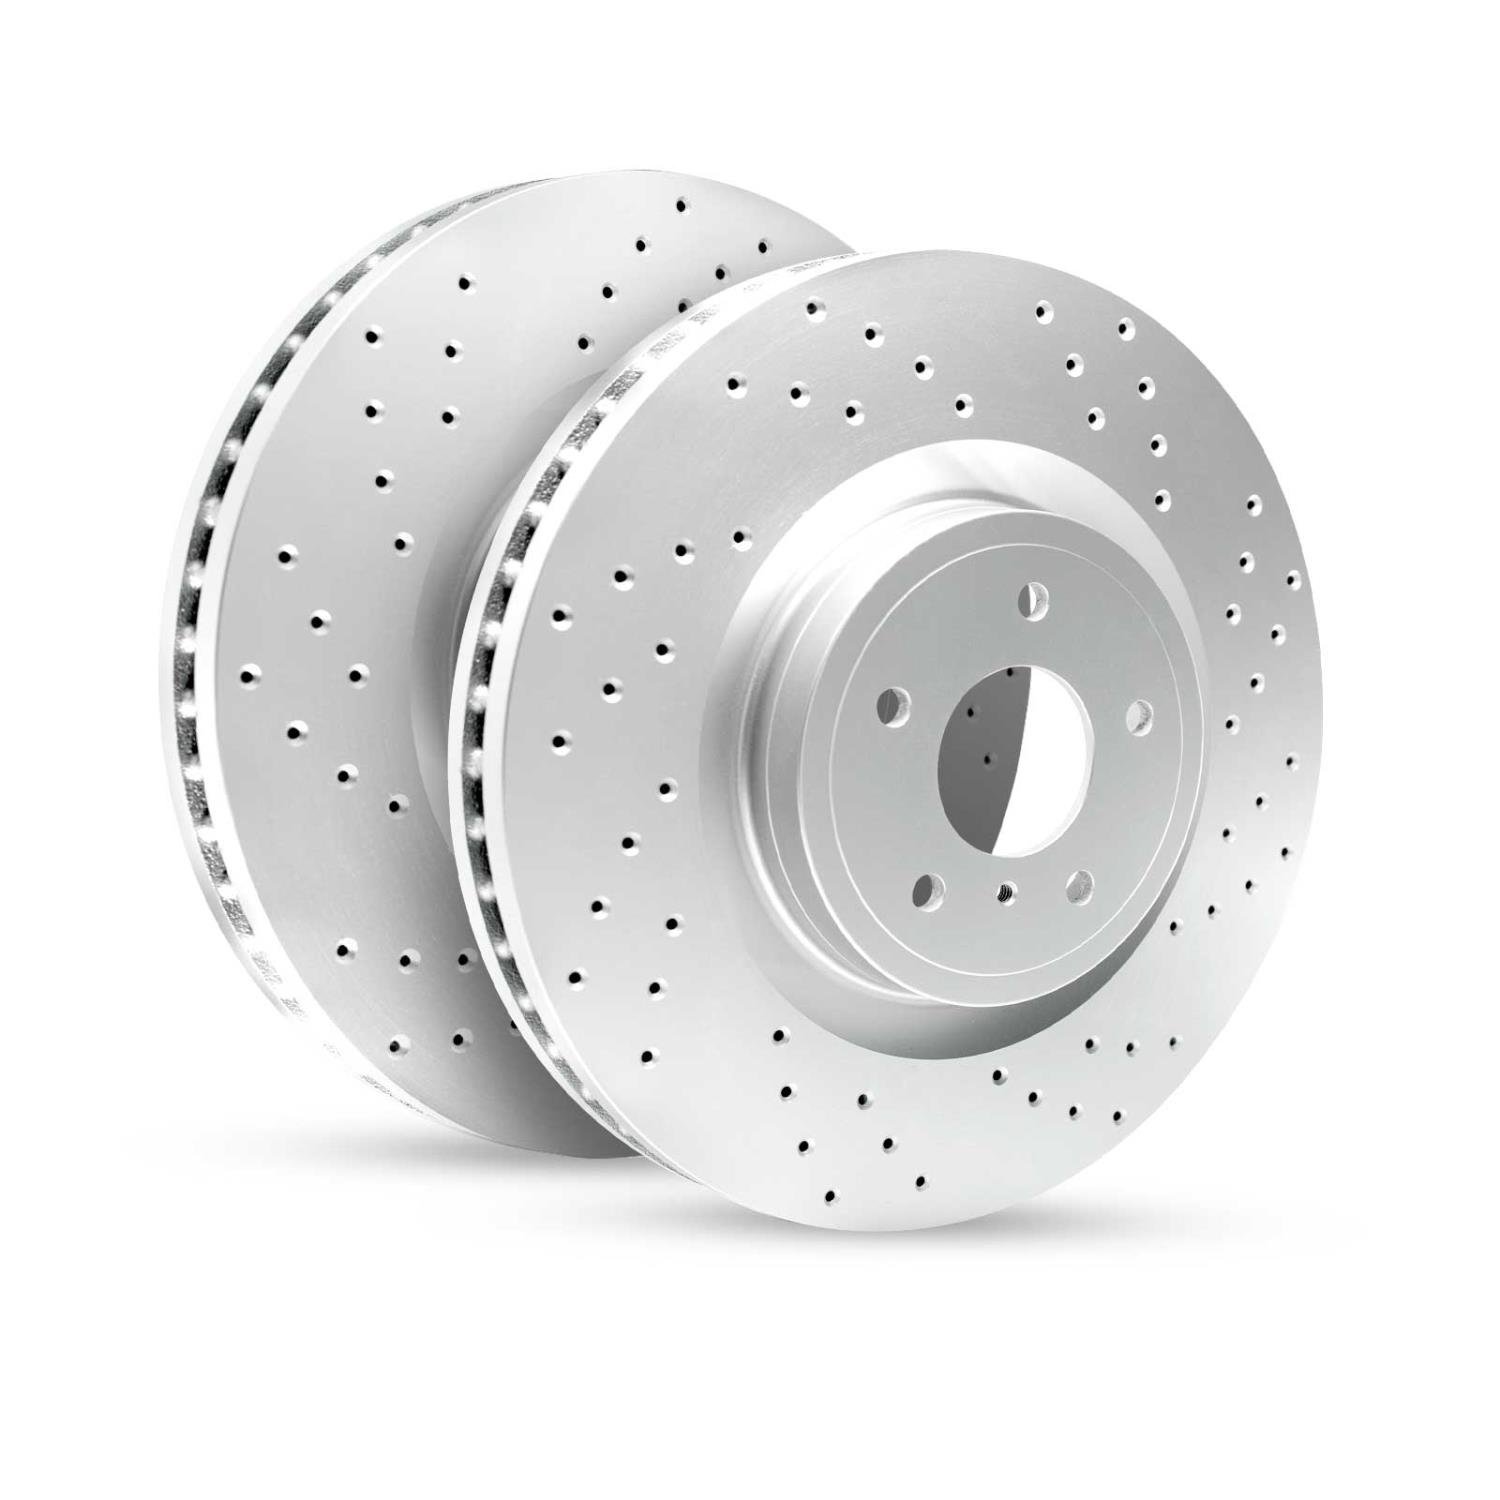 GEO-Carbon Drilled/Slotted Rotors, 1990-2016 Fits Multiple Makes/Models, Position: Front